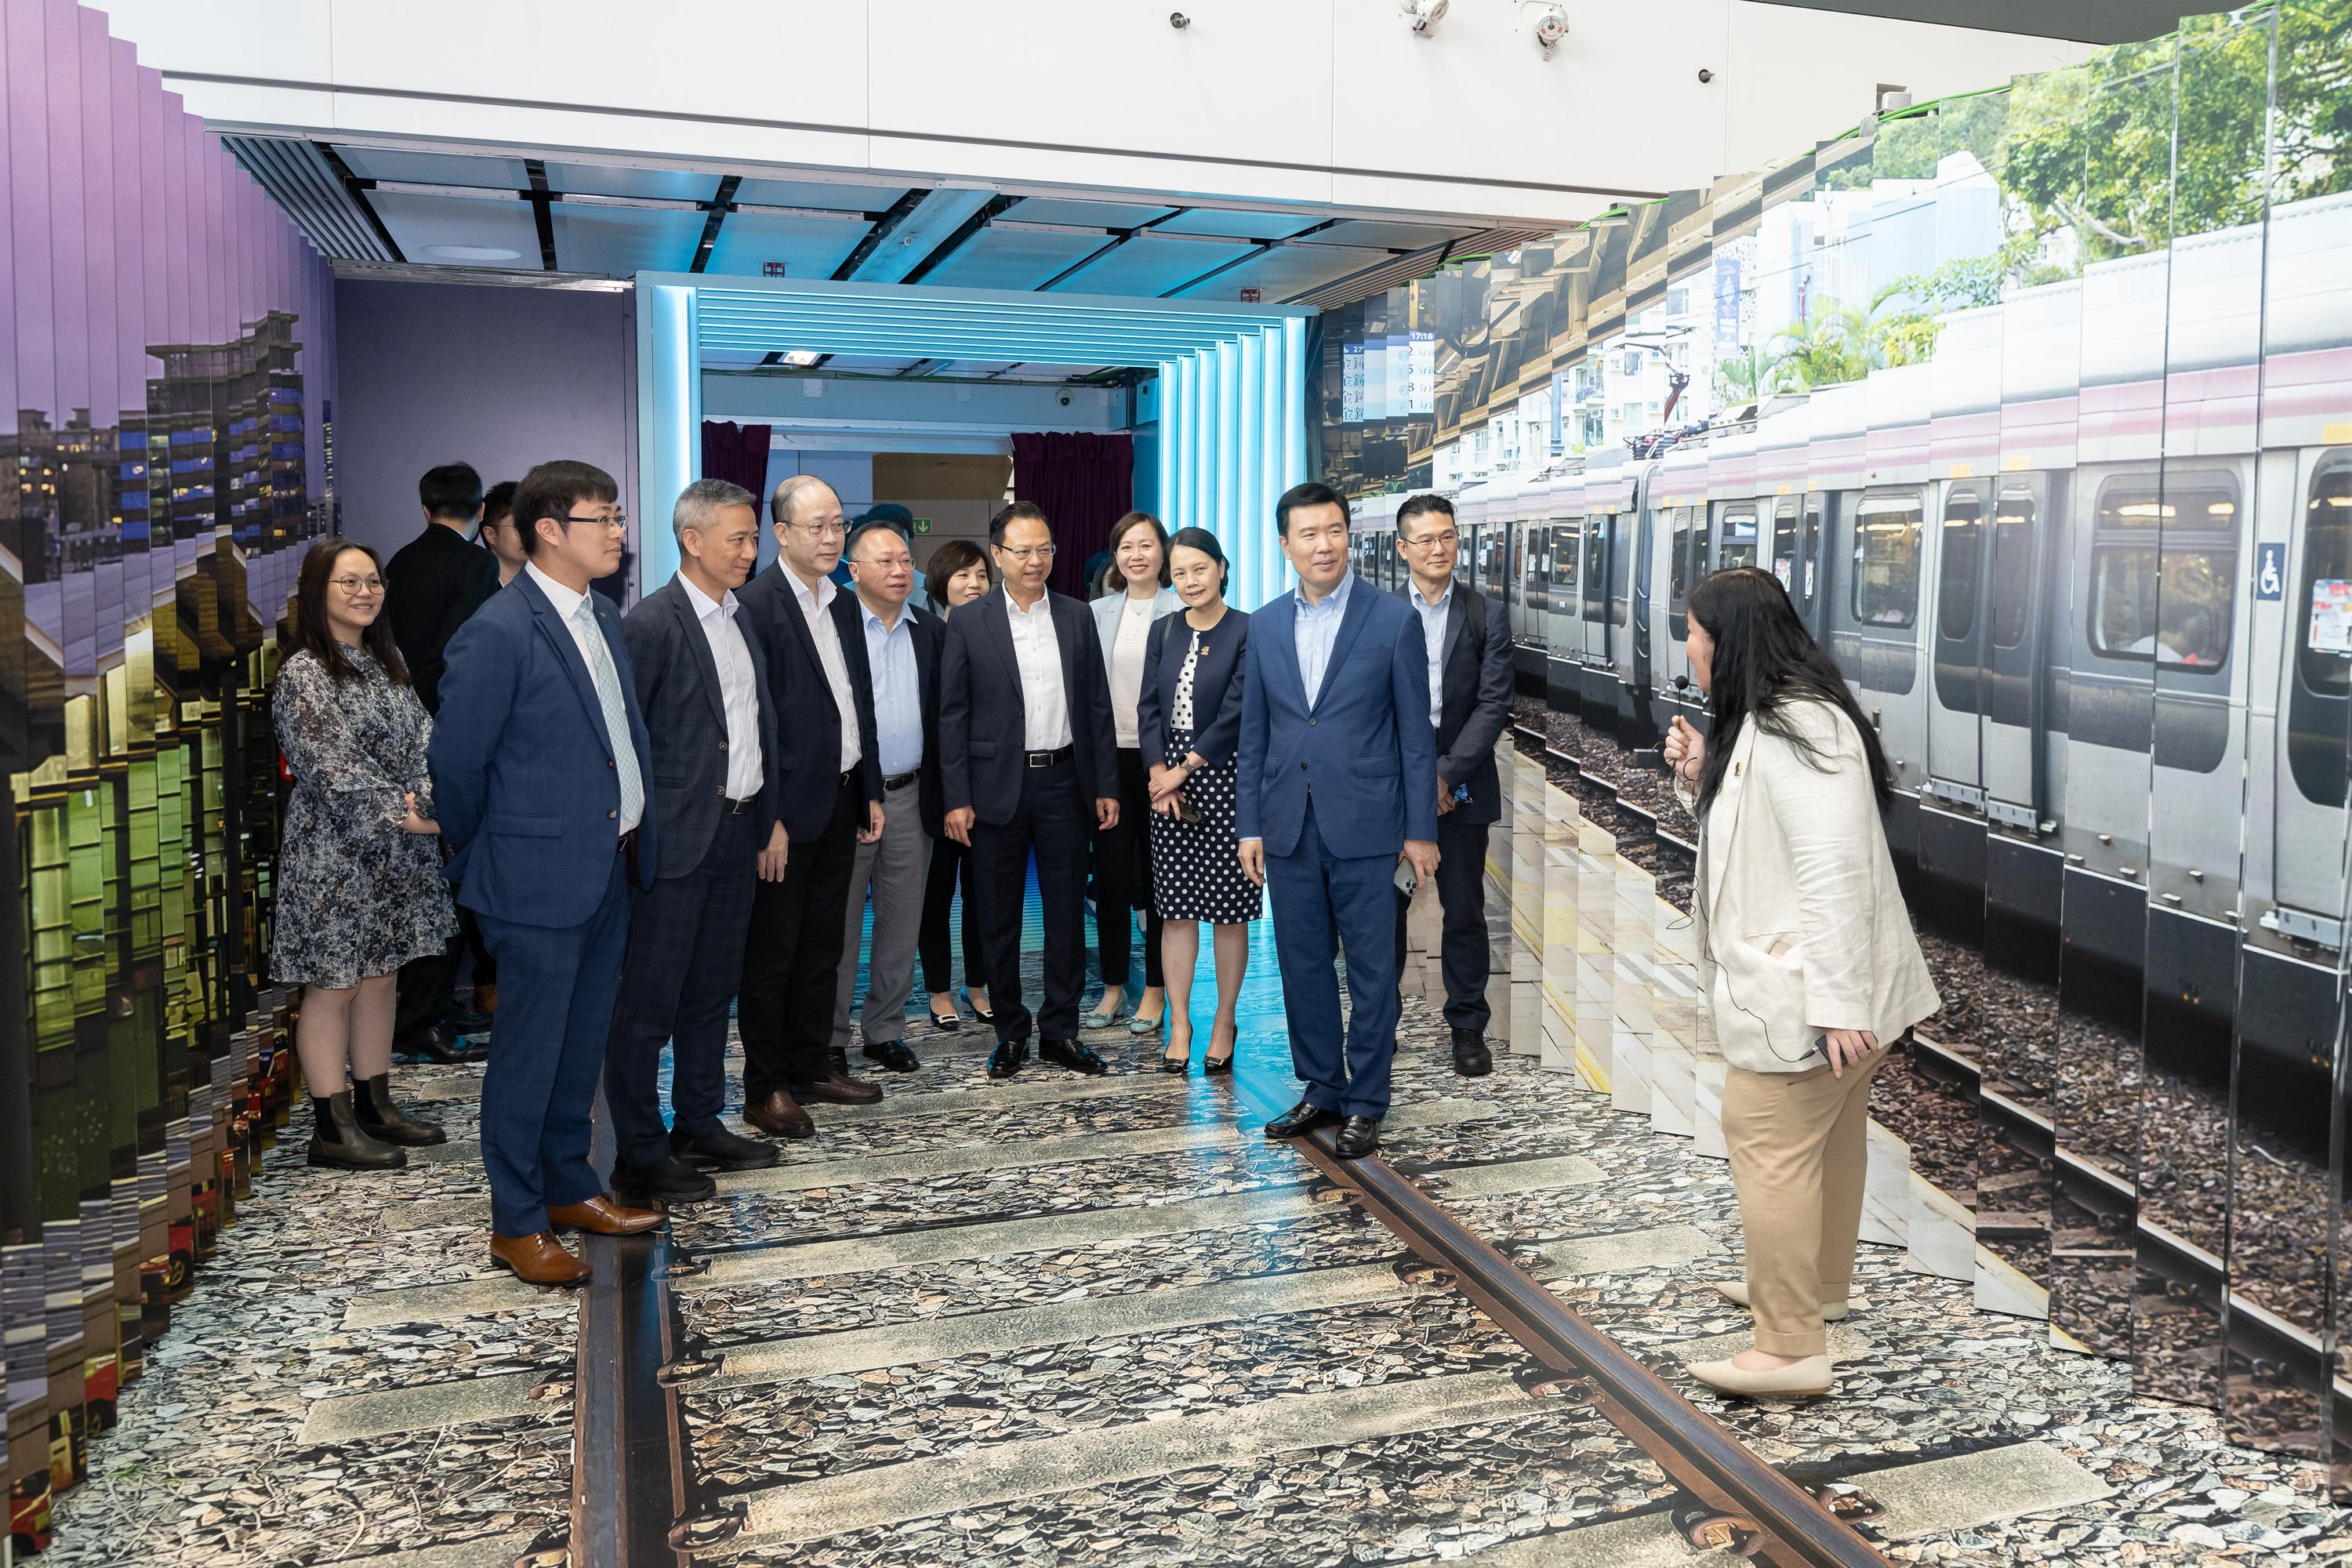 The Legislative Council Panel on Transport visited the "Station Rail Voyage" Exhibition of the MTR Corporation Limited at Hung Hom Station today (April 24) to learn more about the development of Hong Kong's railway service.